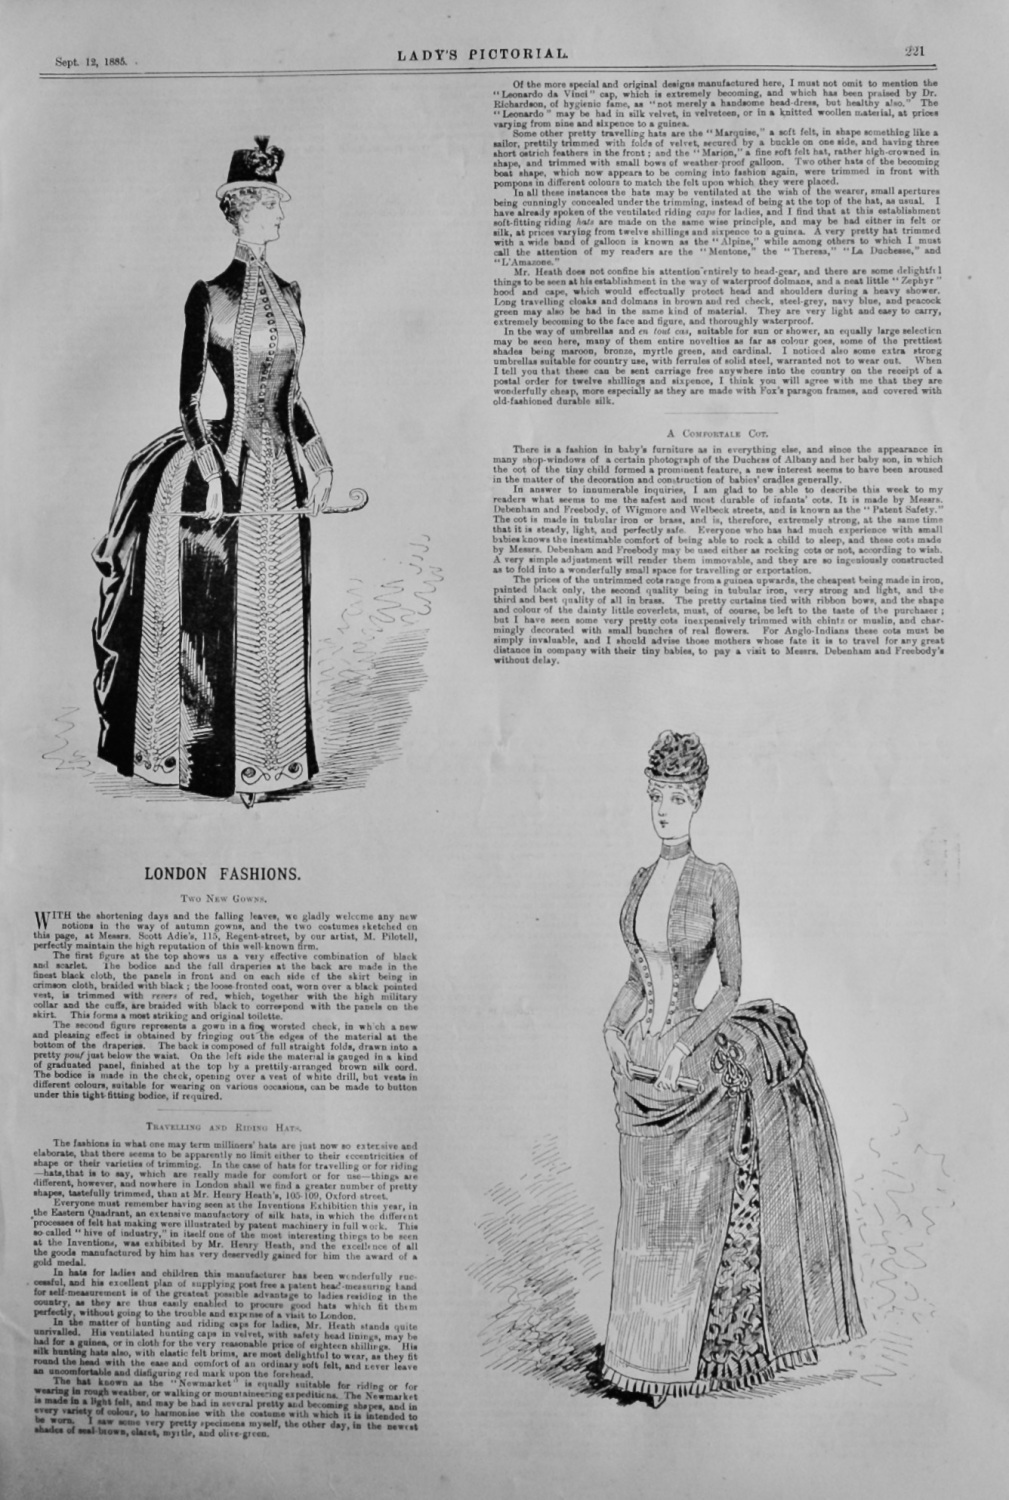 London Fashions.  (Sketches by Pilotell)   1885.